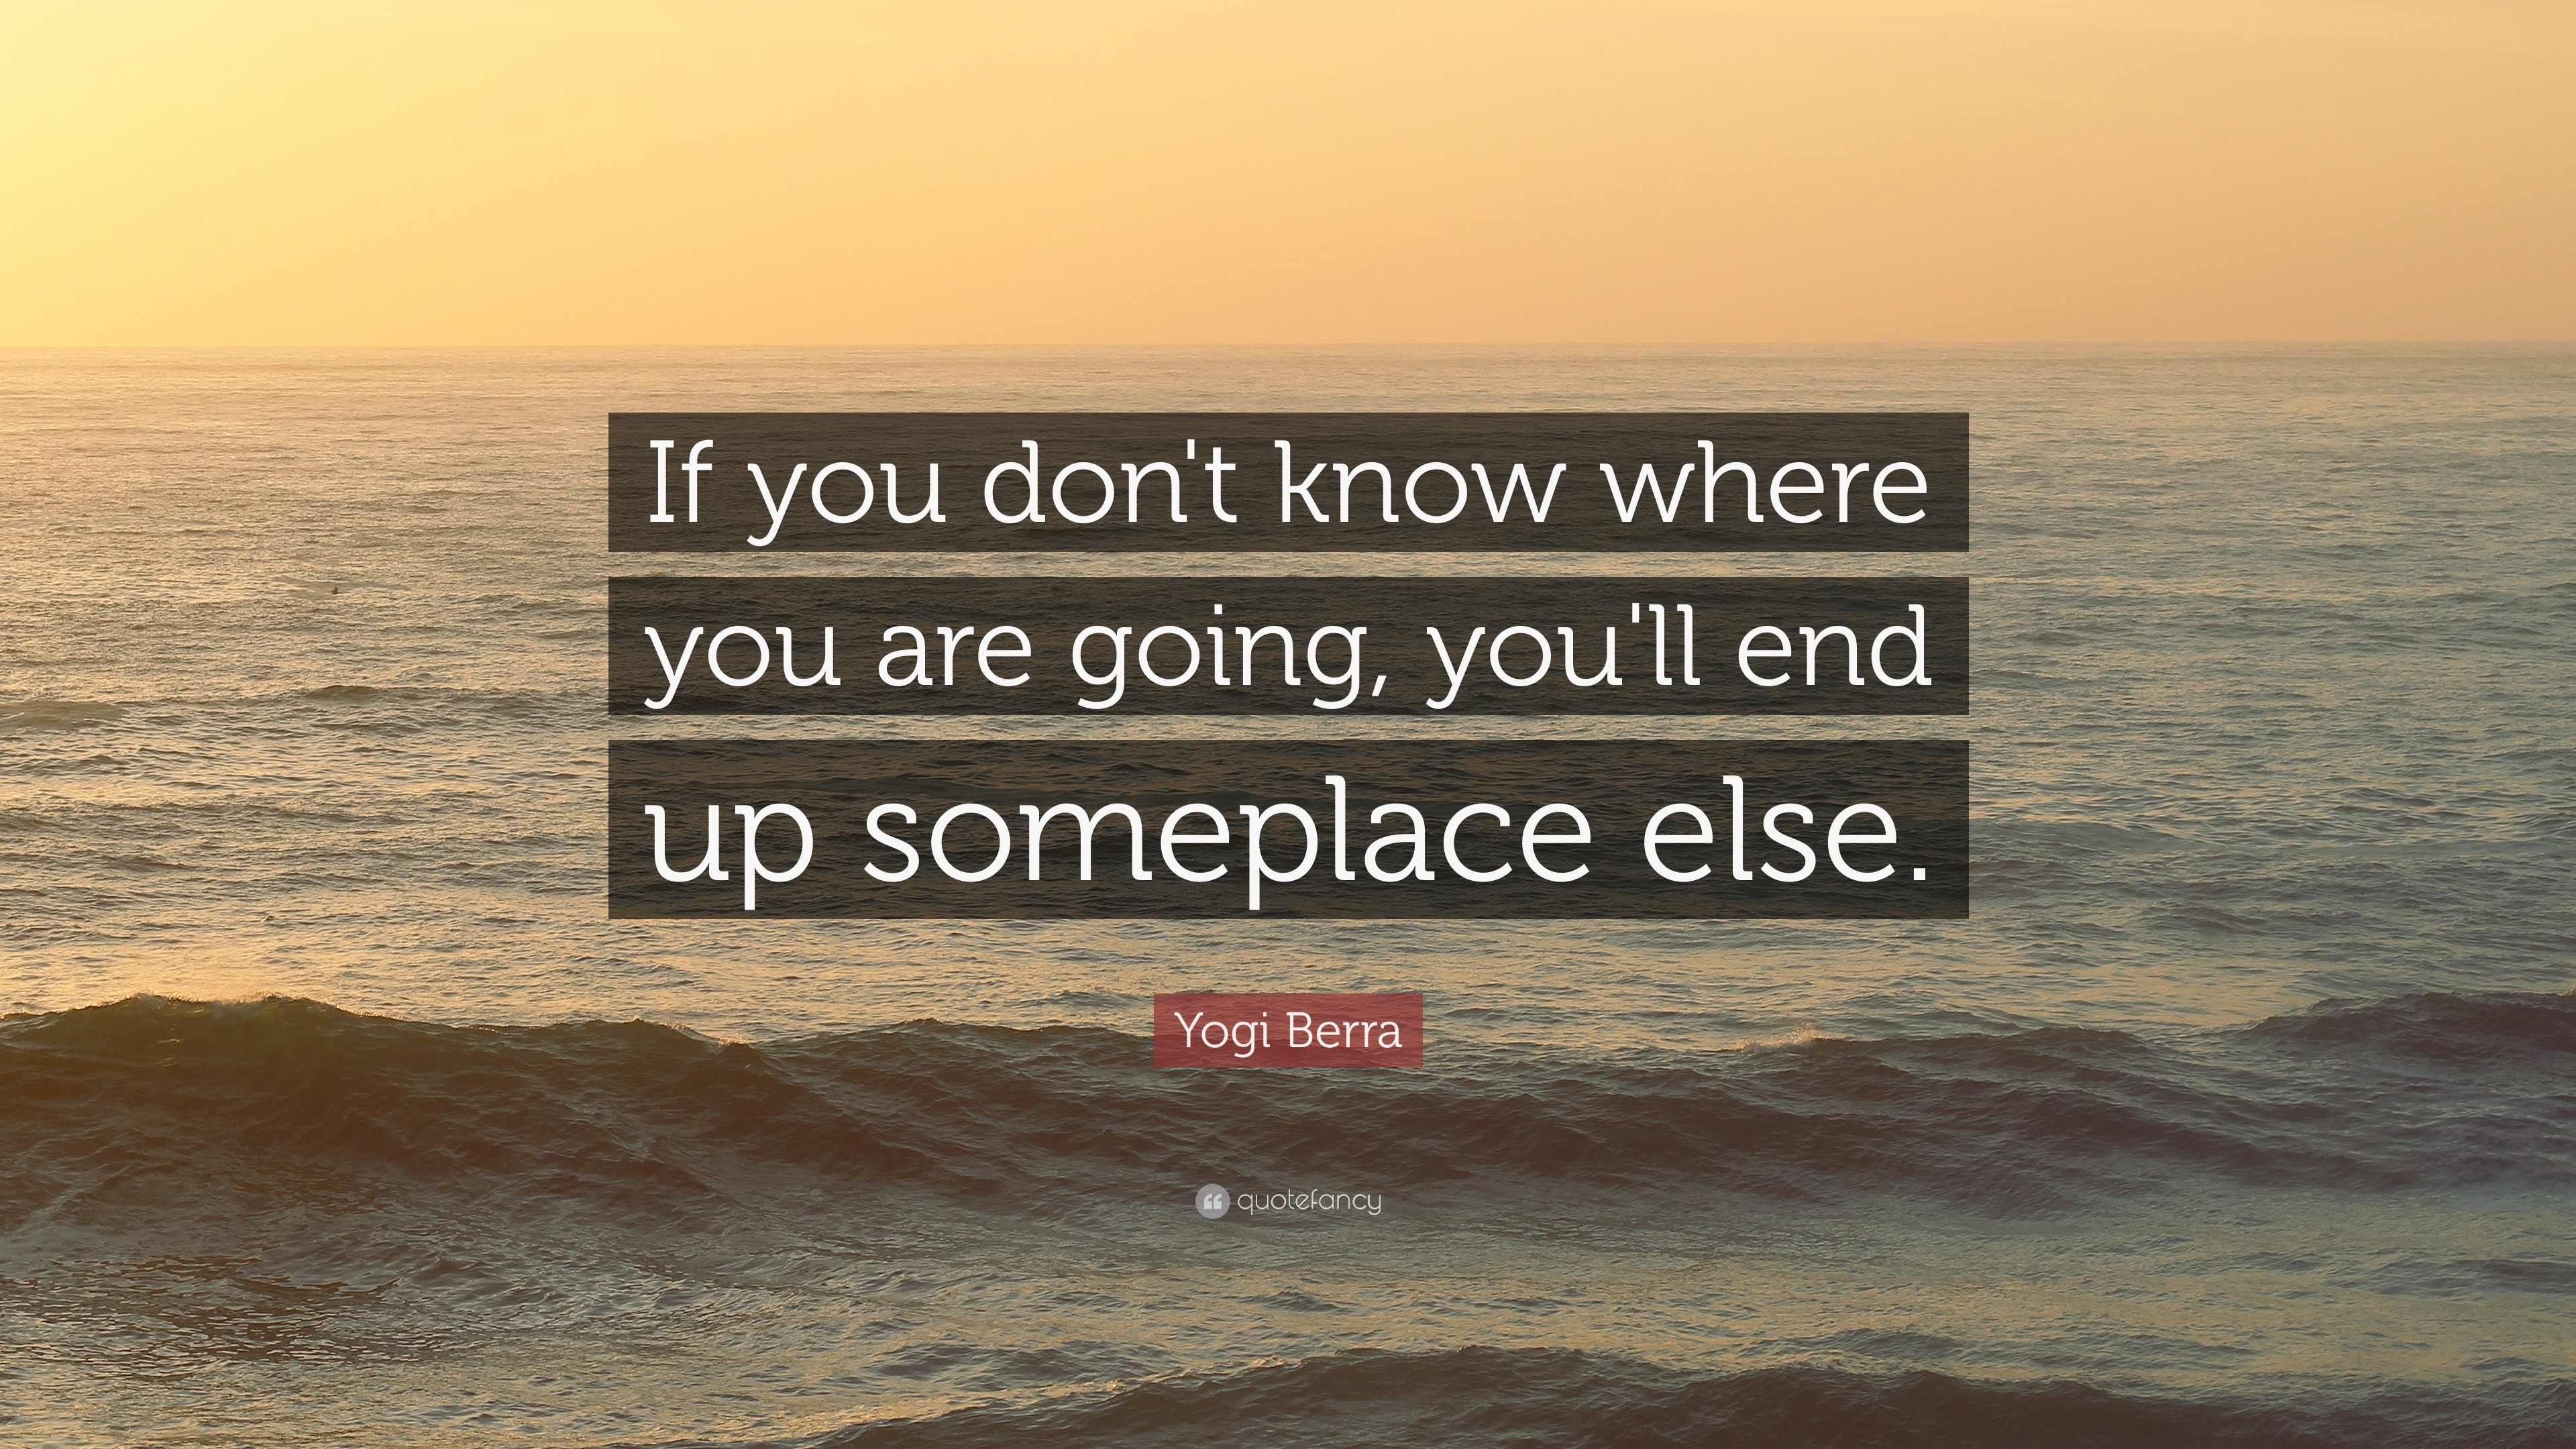 Yogi Berra Quote: “If you don't know where you are going, you'll end up